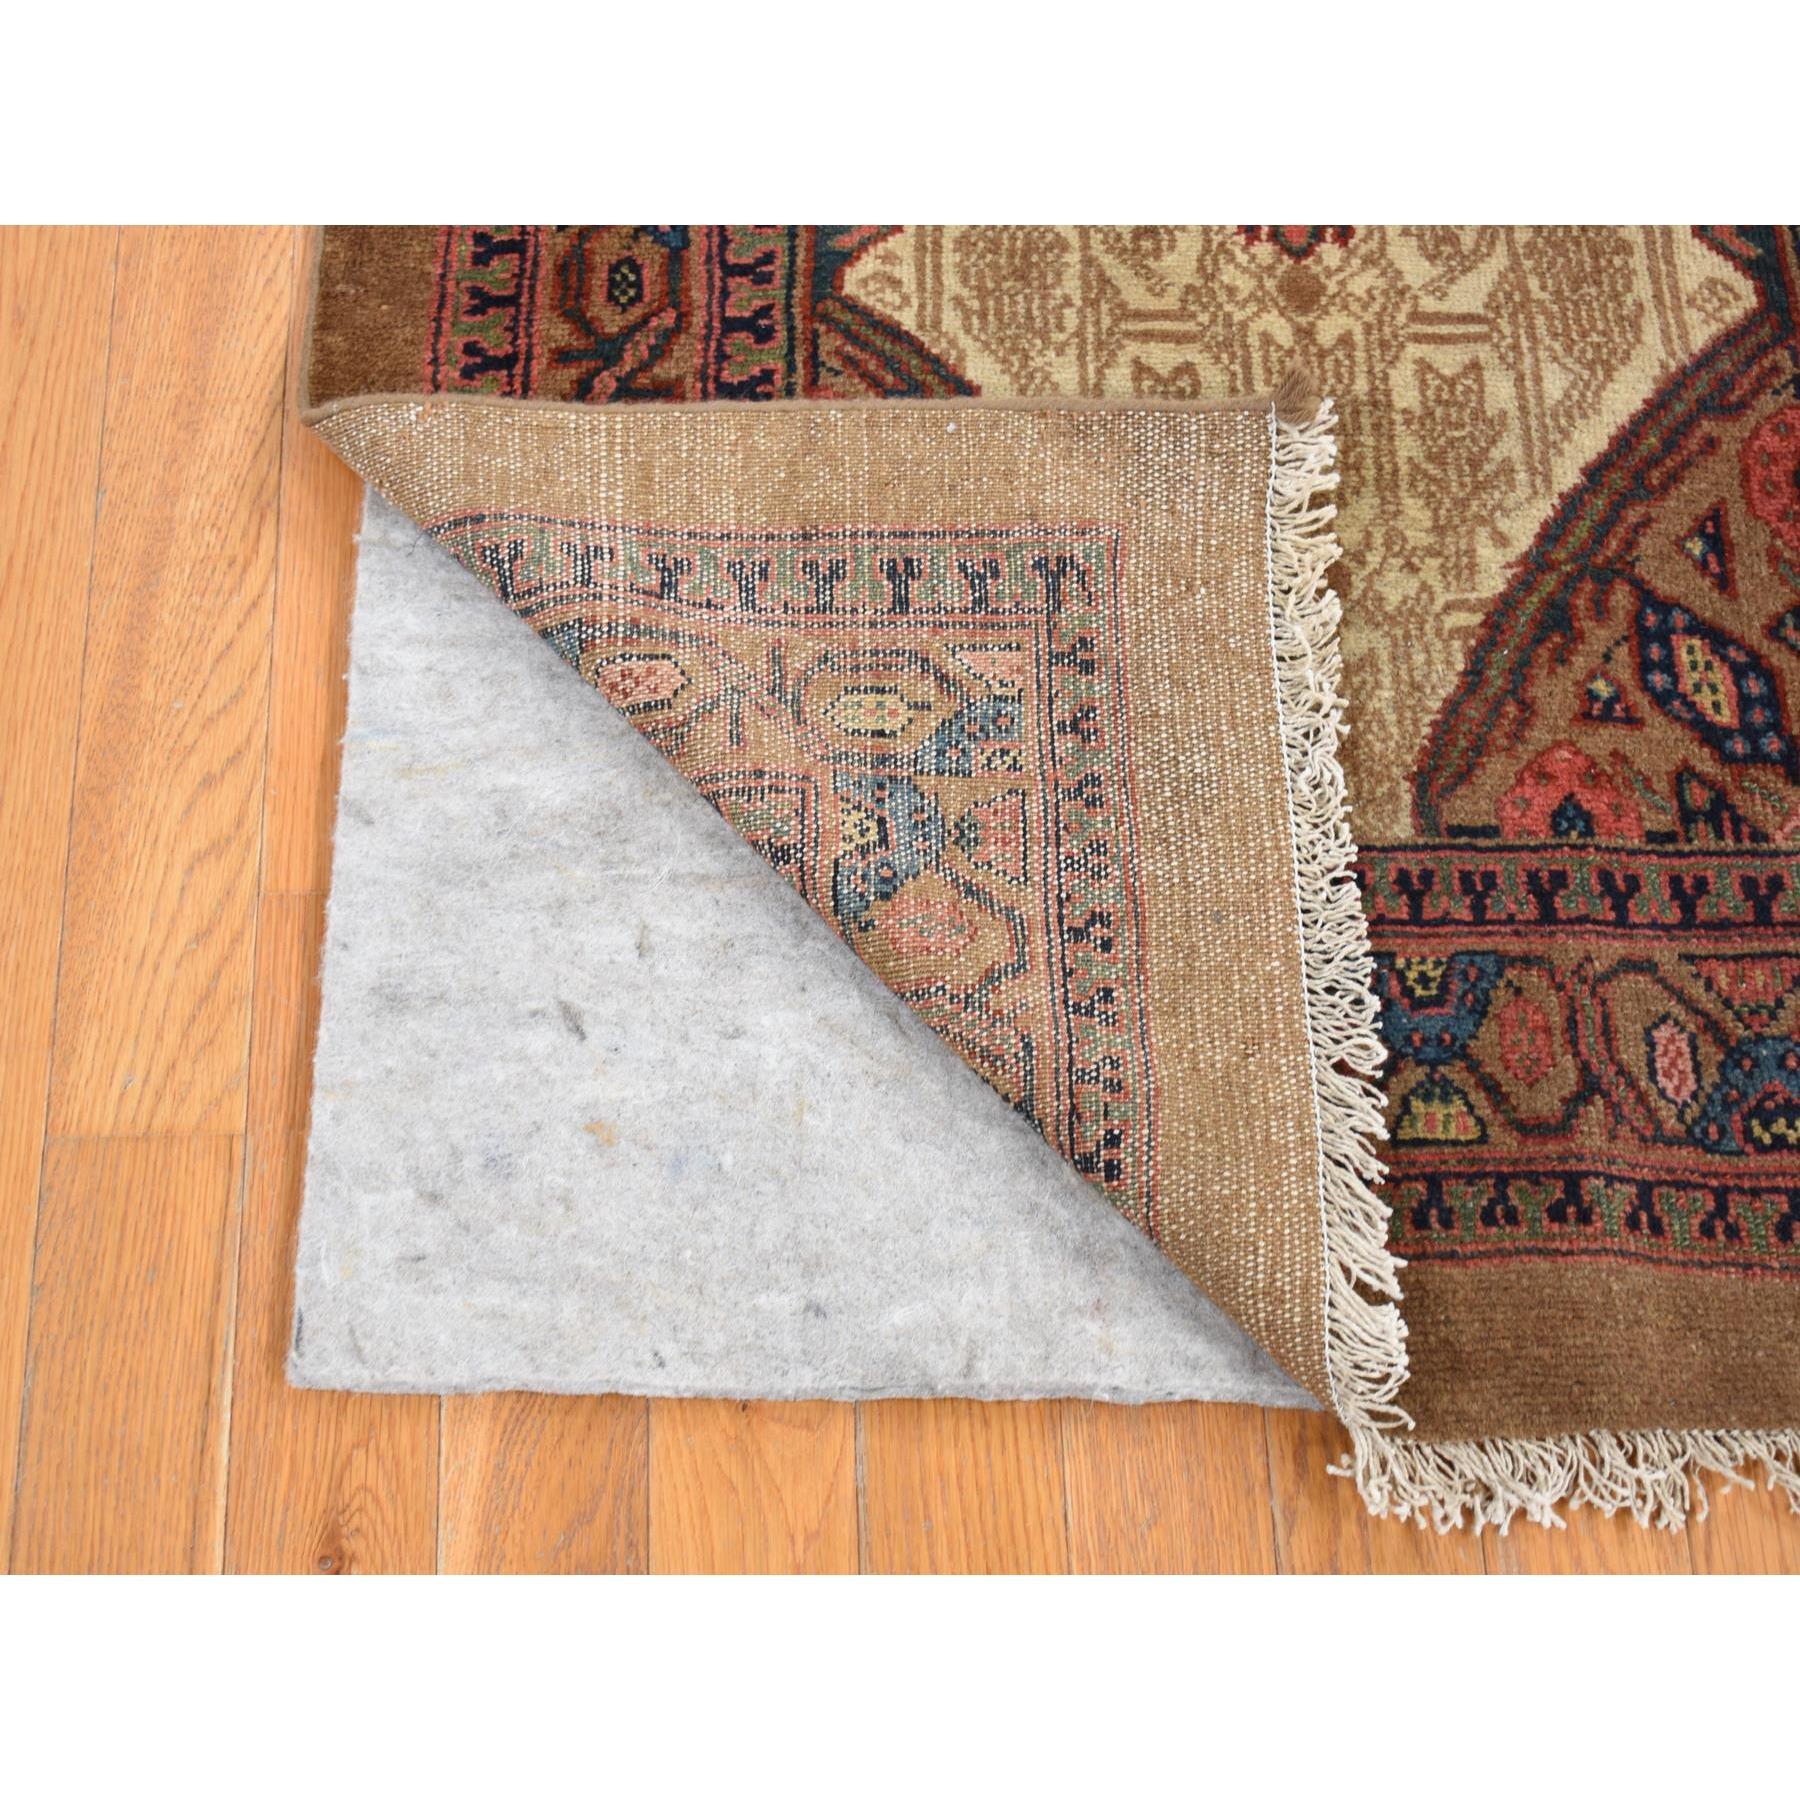 This fabulous hand-knotted carpet has been created and designed for extra strength and durability. This rug has been handcrafted for weeks in the traditional method that is used to make exact rug size in feet and inches : 3'2